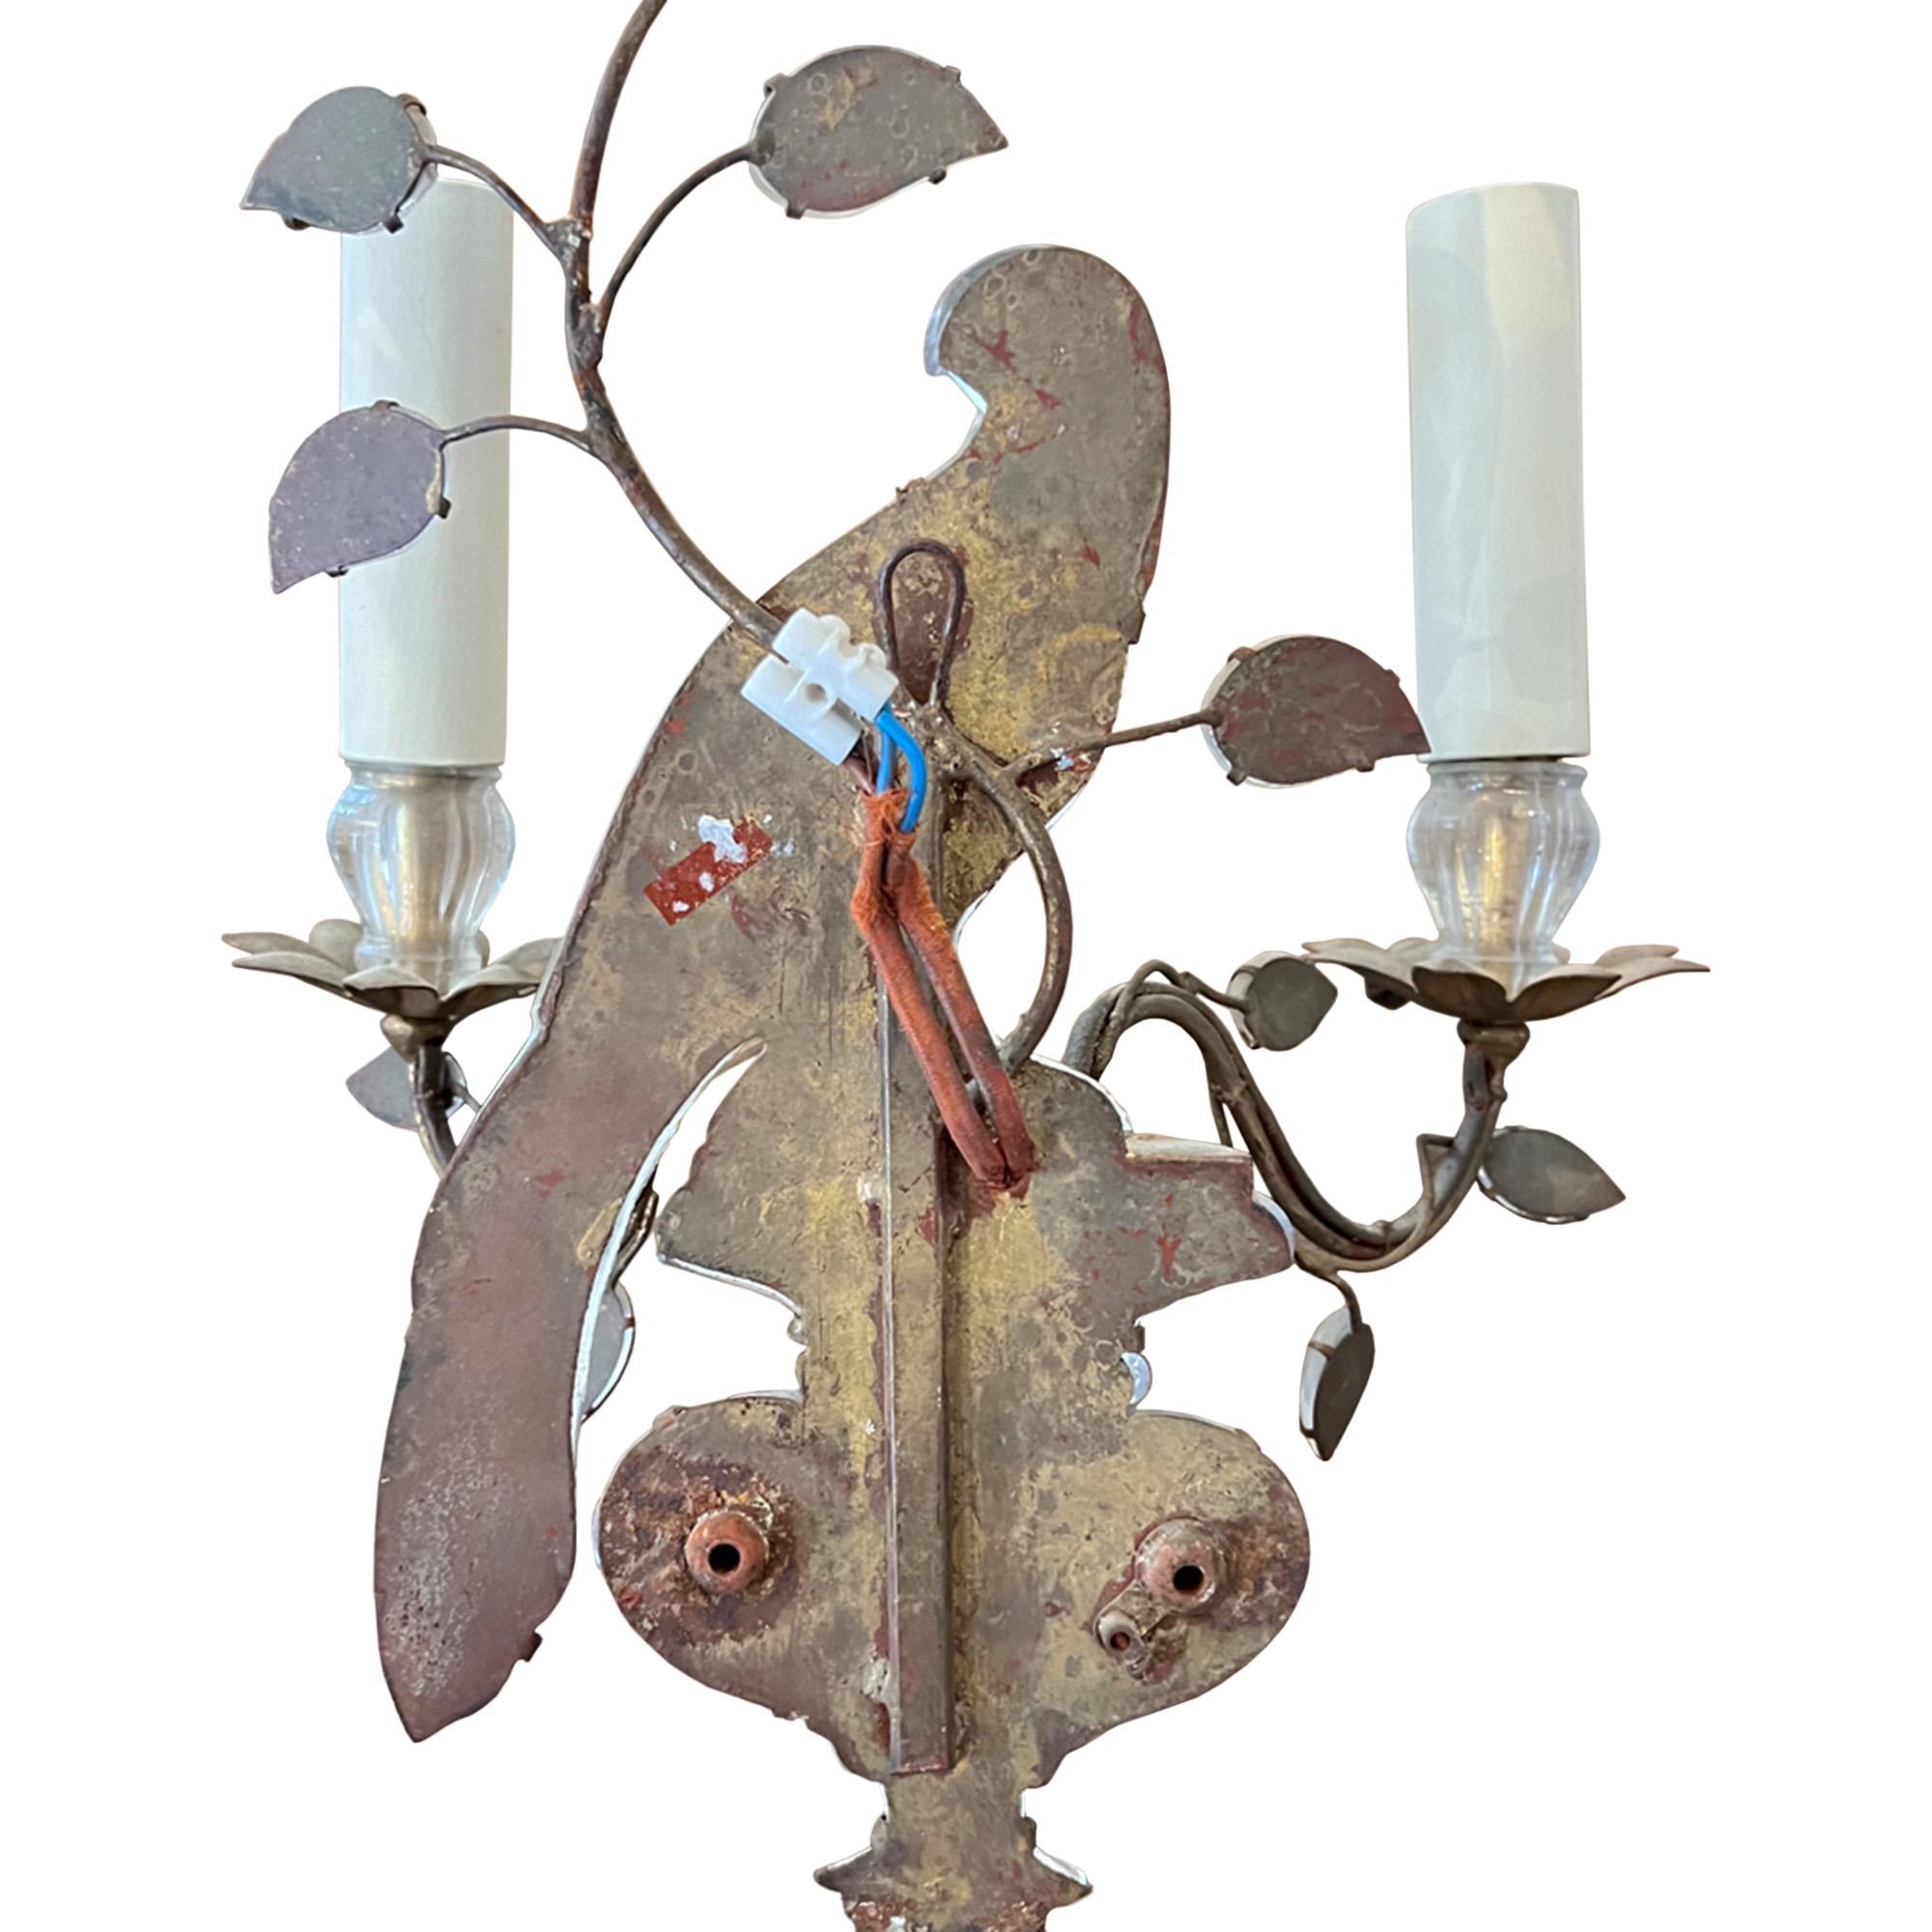 A Near Pair of Maison Baguès Wall Sconces With Urns and Parrots 1